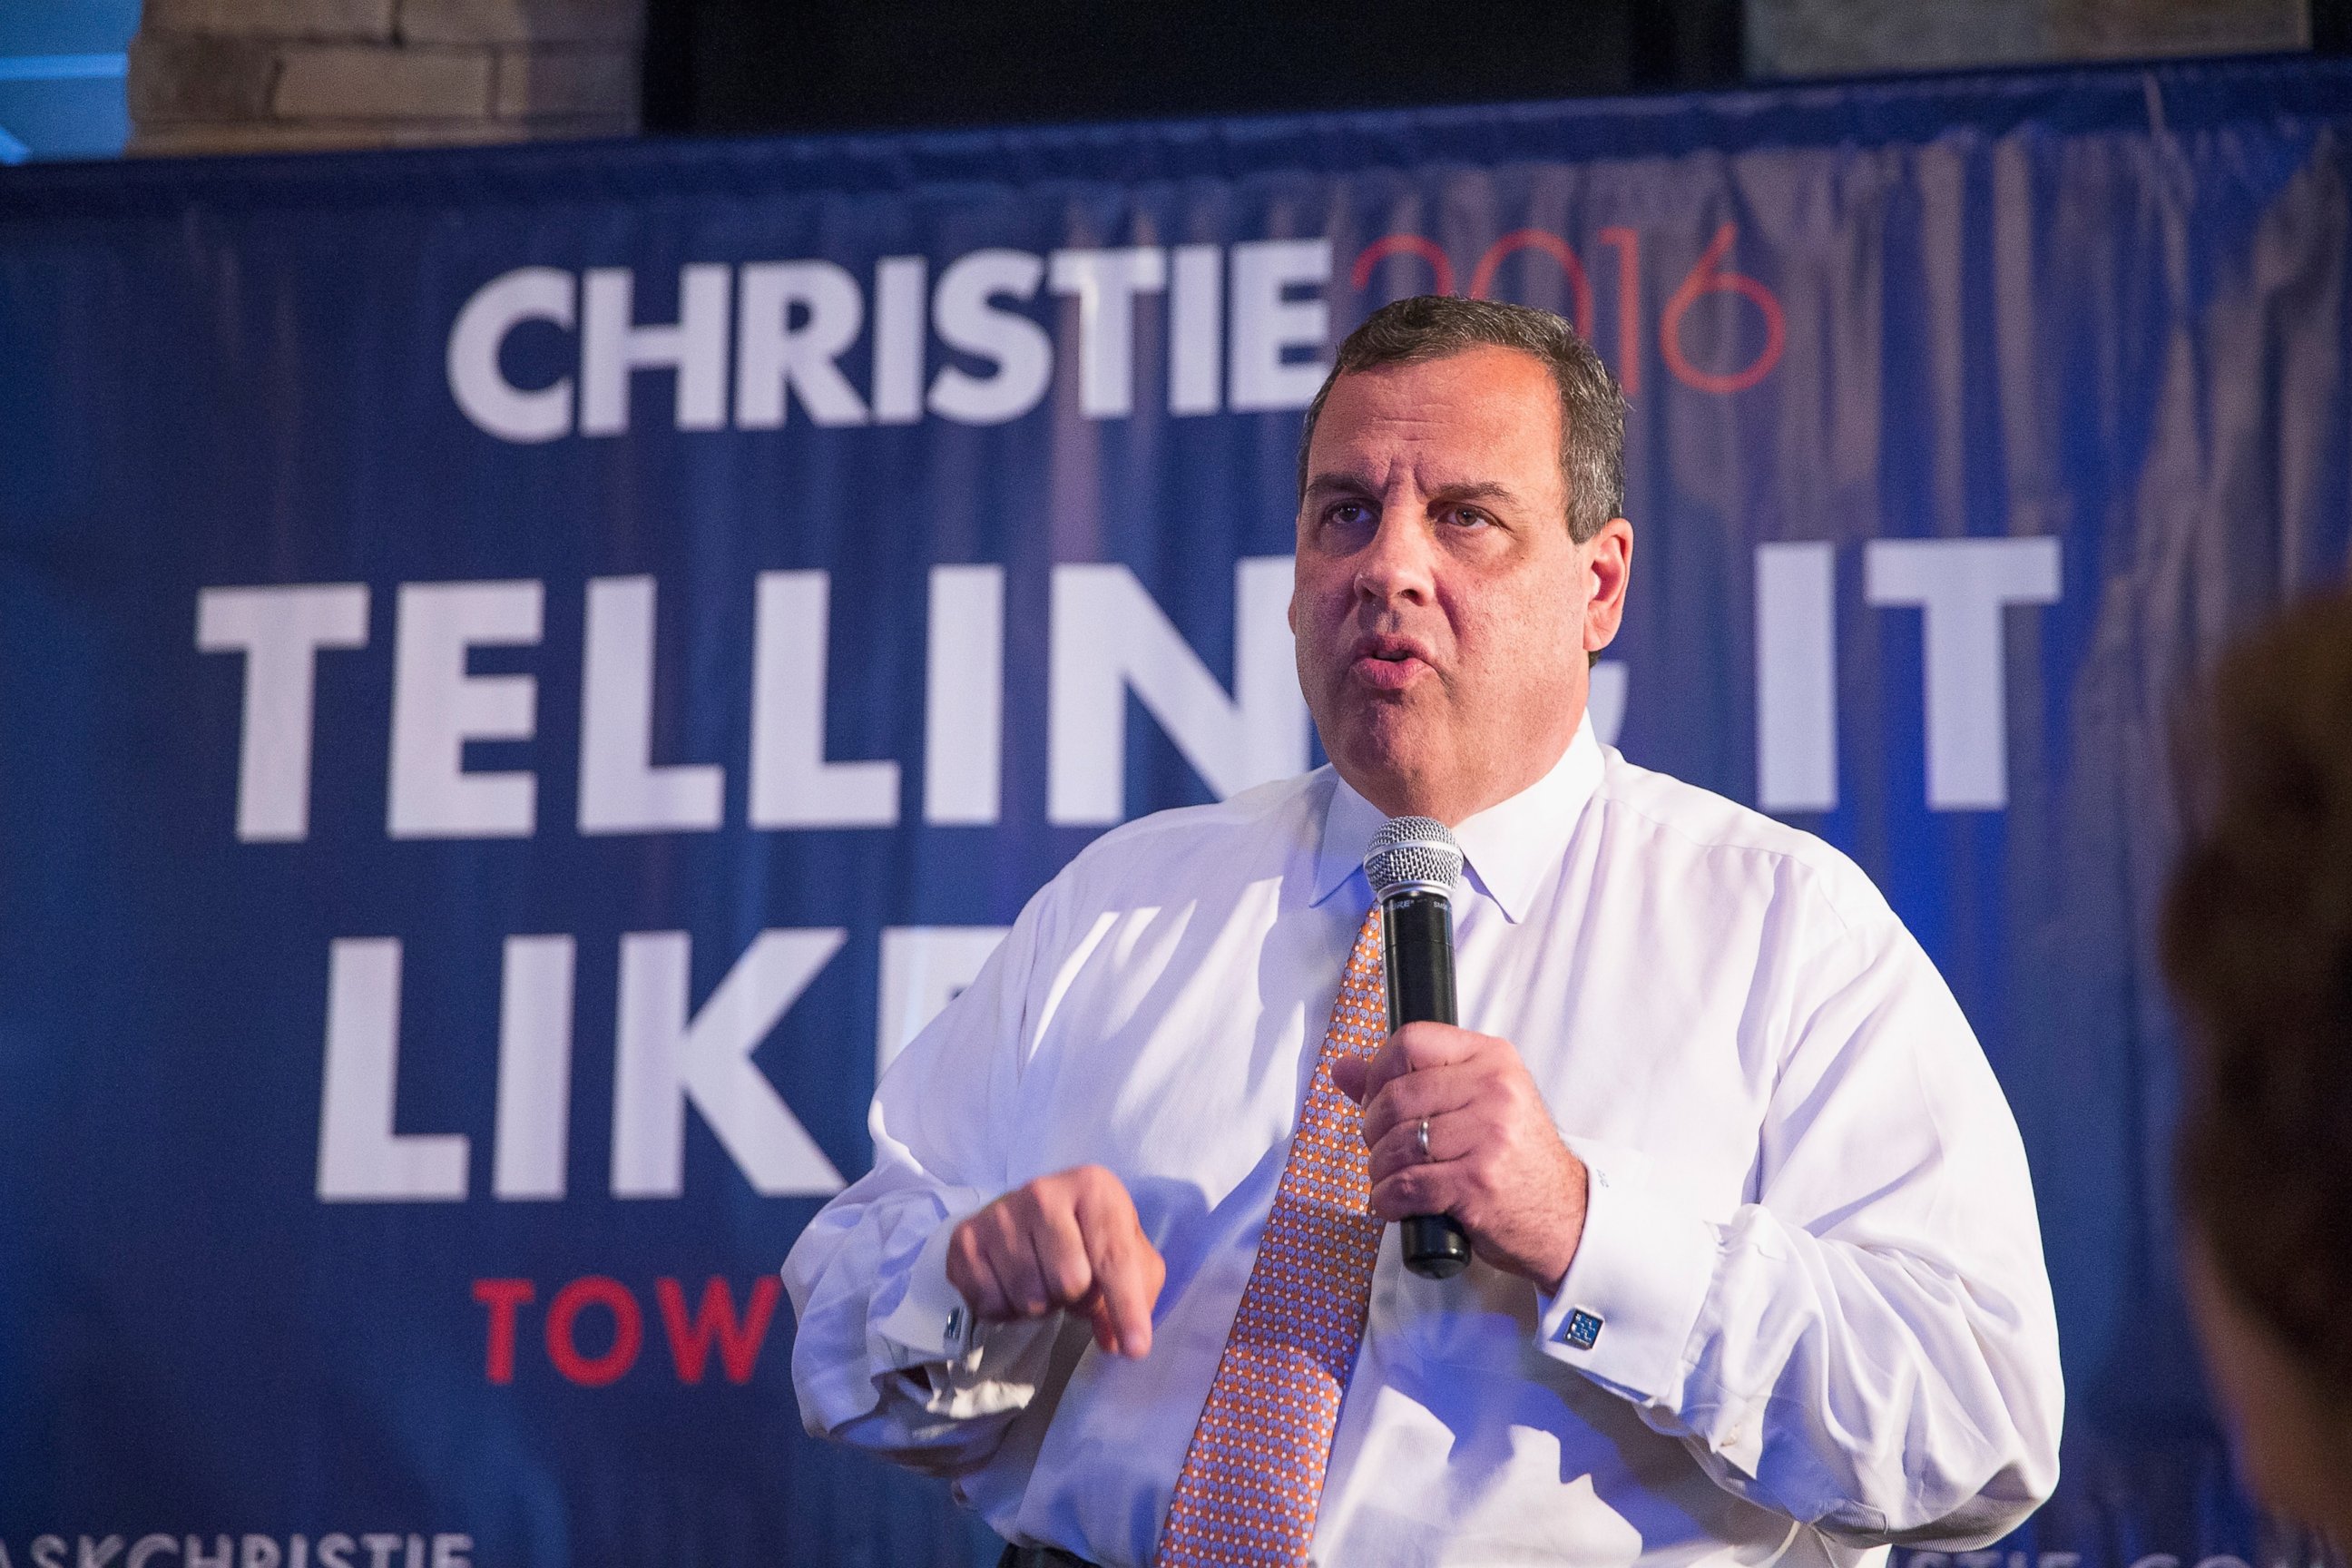 PHOTO: Republican presidential candidate New Jersey Governor Chris Christie speaks to guests gathered for a campaign event at Jersey Grille on July 24, 2015 in Davenport, Iowa.